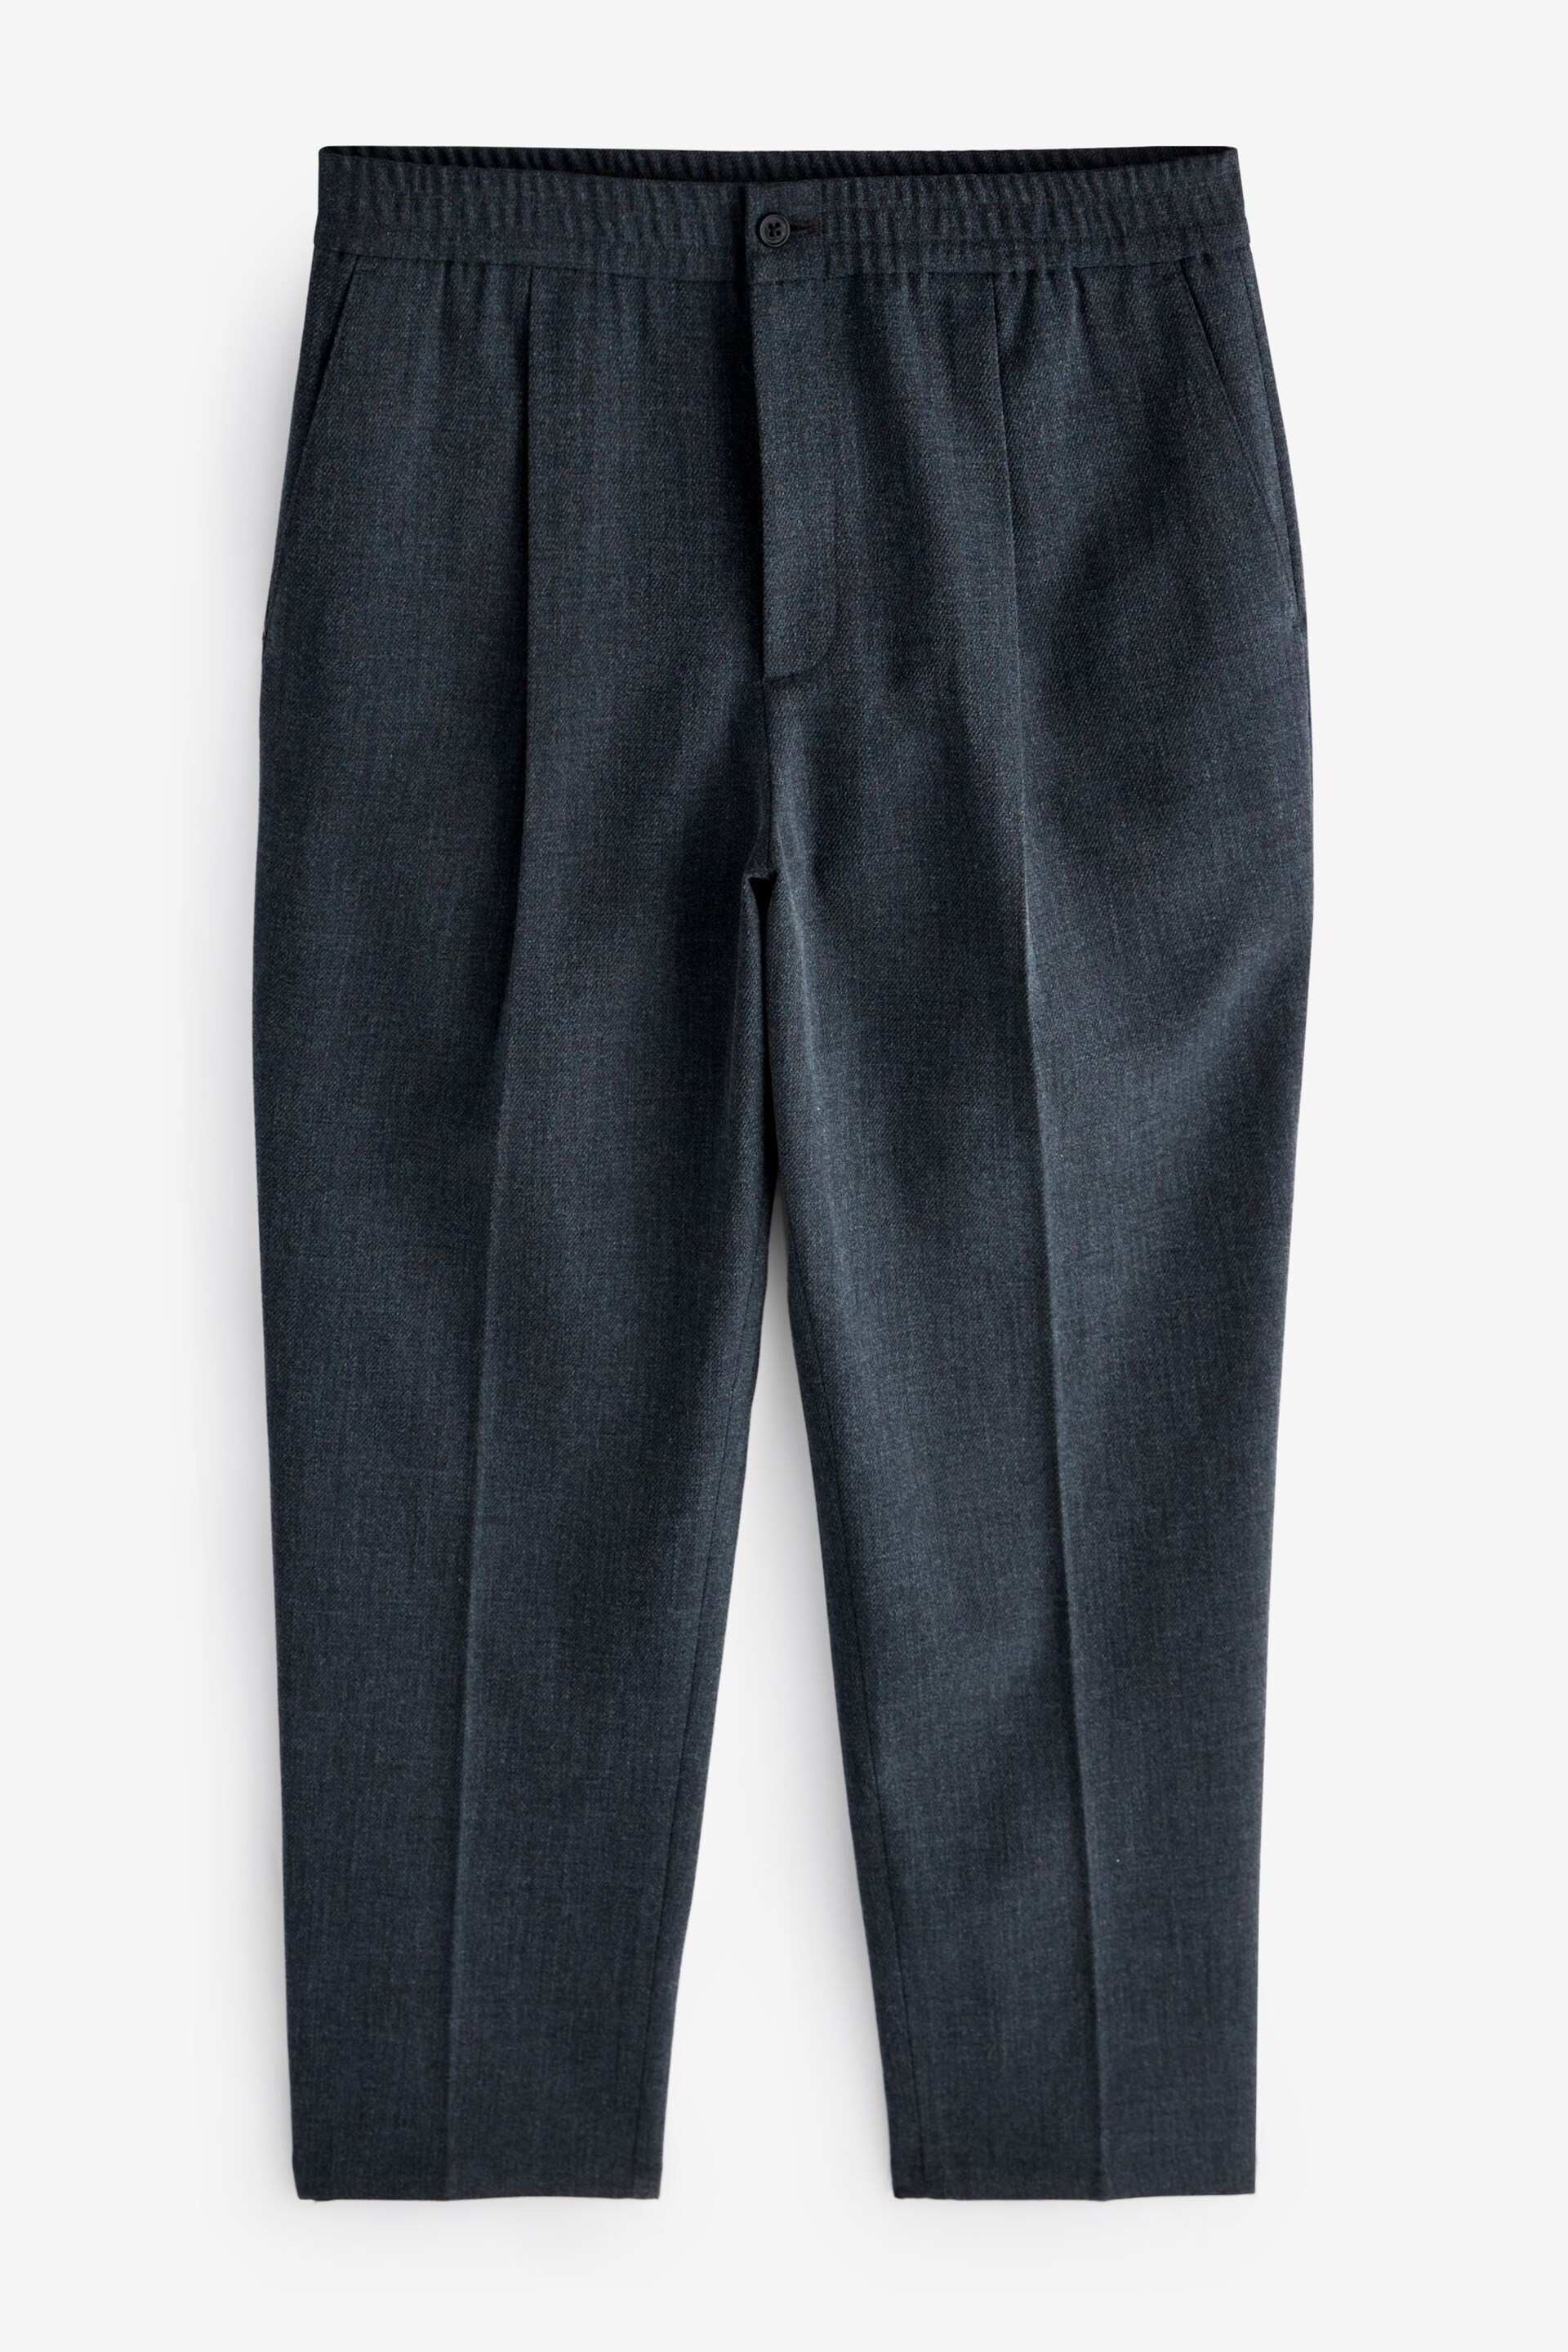 Charcoal Grey Relaxed Fit EDIT Jogger Trousers - Image 6 of 9